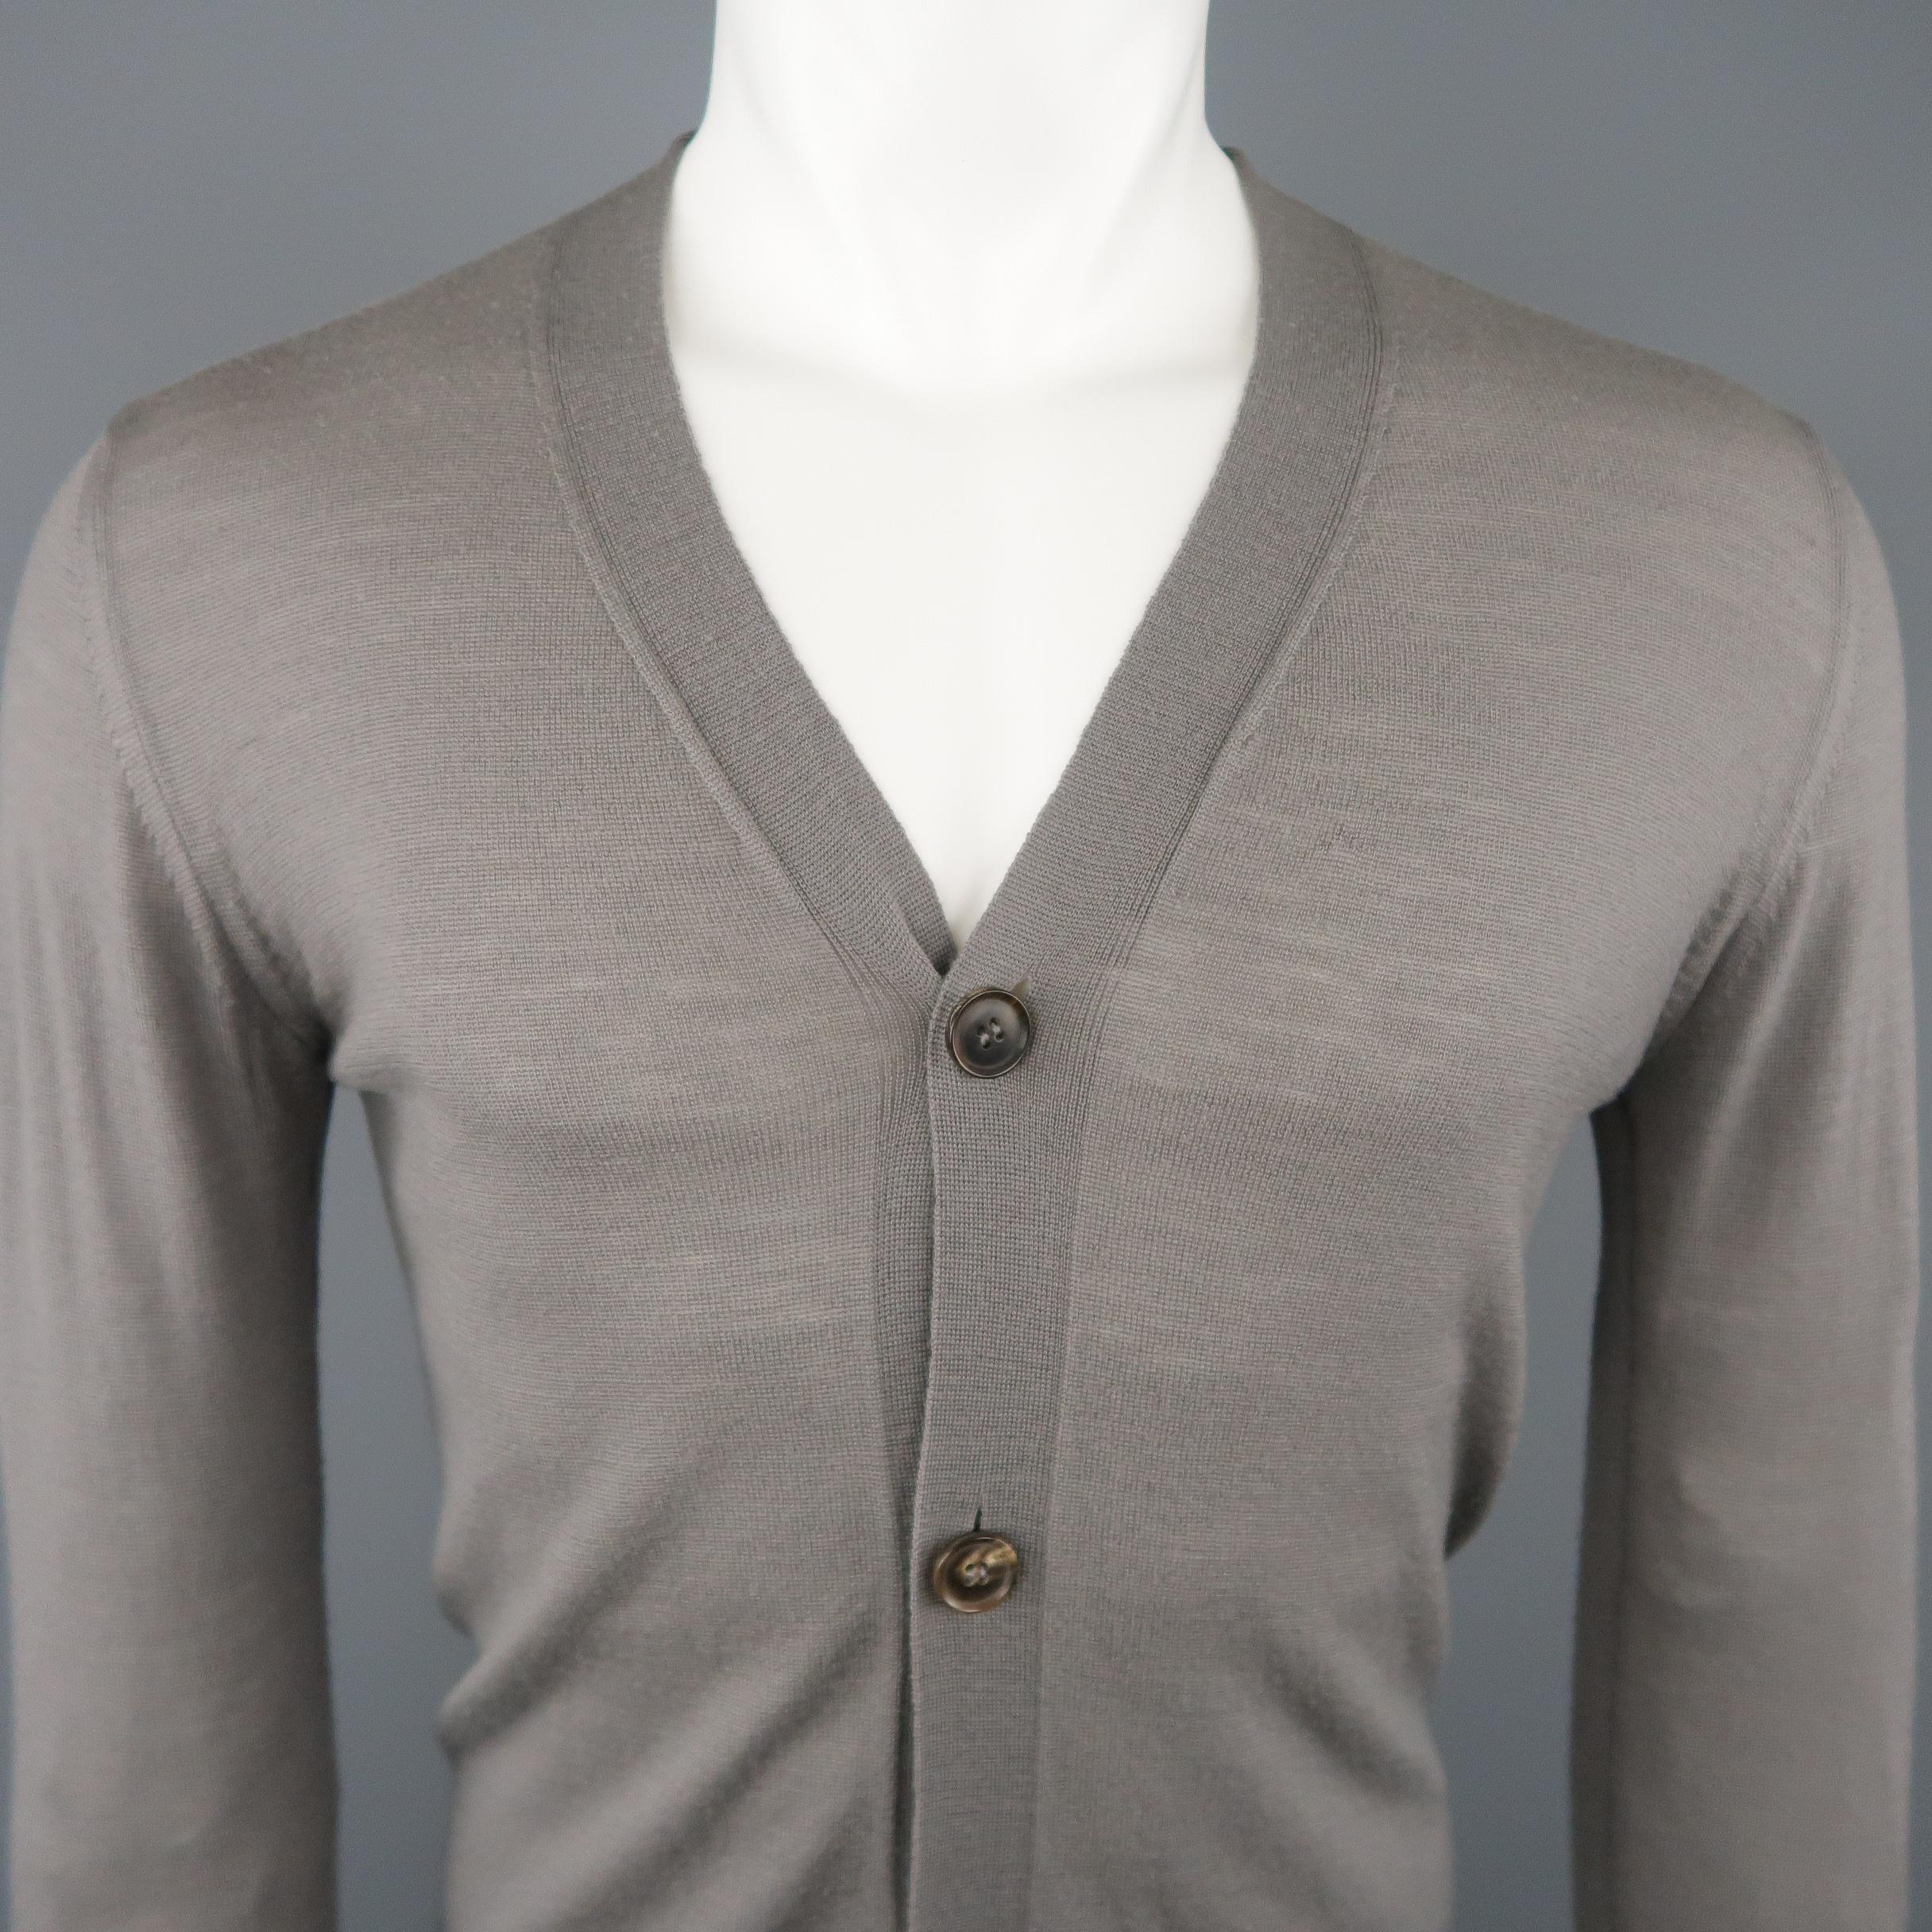 RICK OWENS cardigan comes in sheer taupe gray merino wool knit with a V neck, four button front, and curved hem. Made in Italy.
 
Excellent Pre-Owned Condition.
Marked: M
 
Measurements:
 
Shoulder: 18 in.
Chest: 40 in.
Sleeve: 28 in.
Length: 30 in.